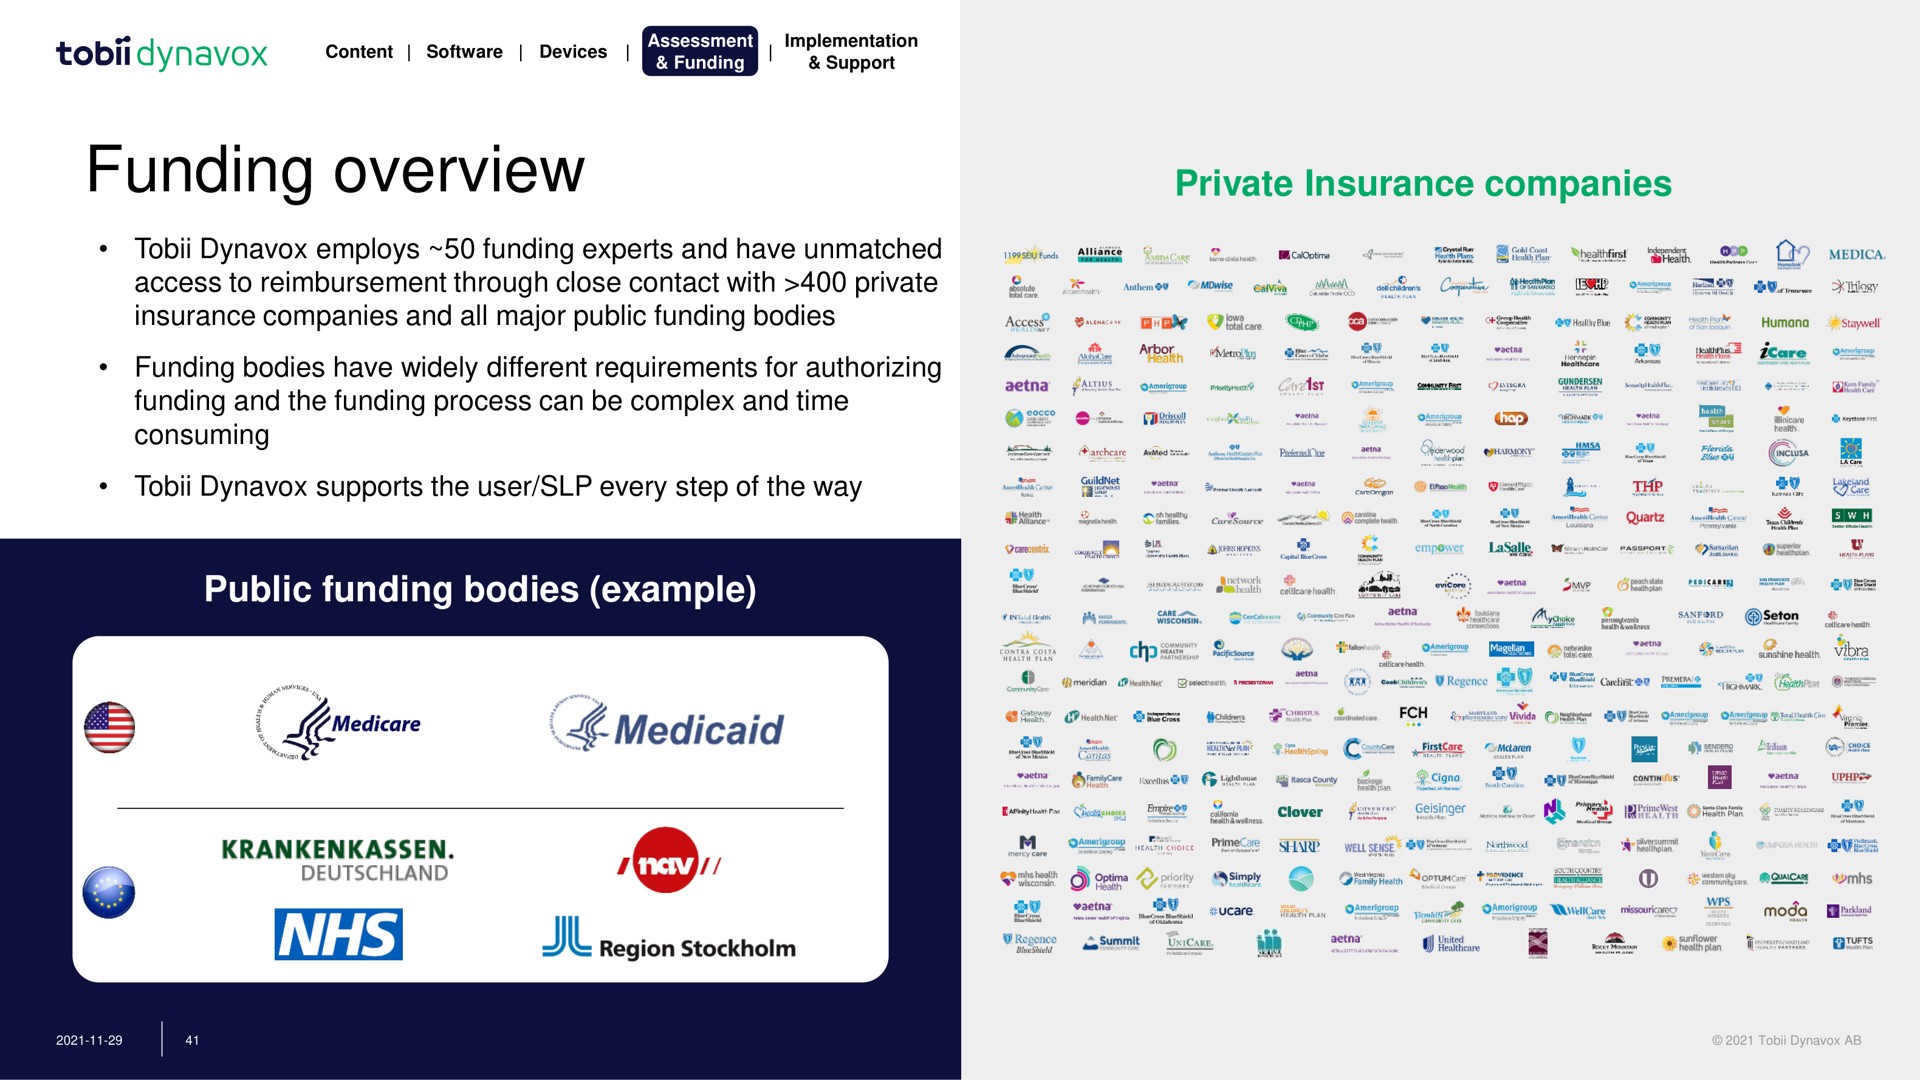 funding overview me private insurance companies tie | Tobii Dynavox